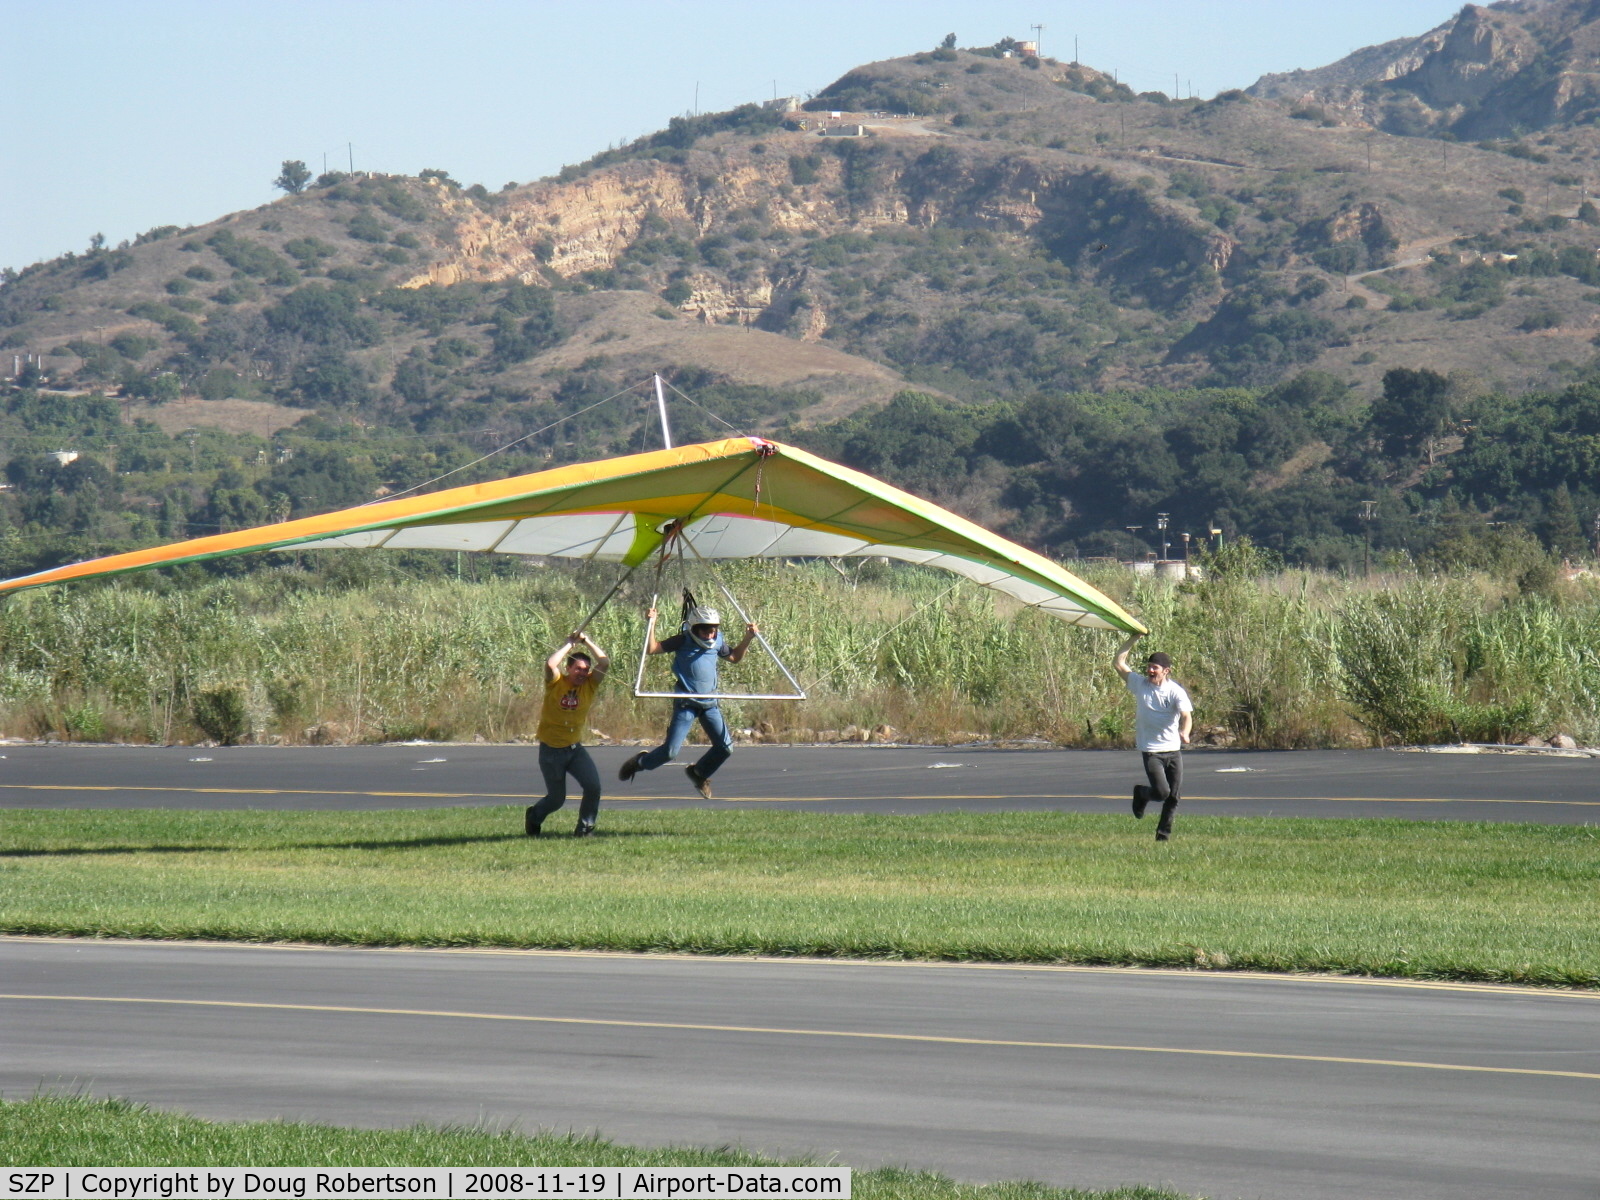 Santa Paula Airport (SZP) - Repealing the Law of Gravity-Hang Glider launching from level ground-Momentary liftoff with helping push